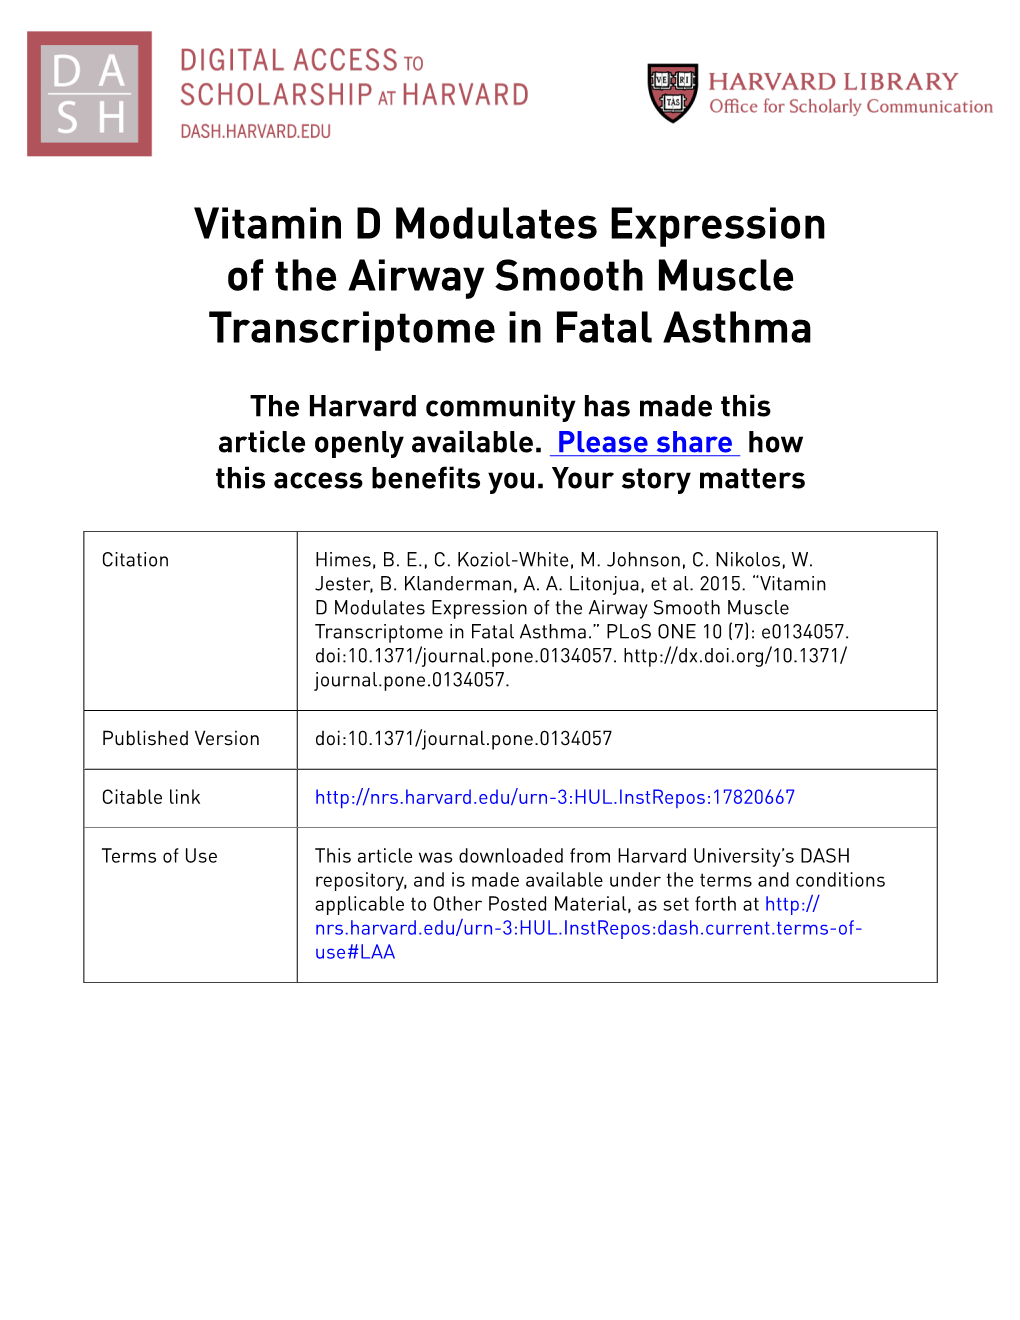 Vitamin D Modulates Expression of the Airway Smooth Muscle Transcriptome in Fatal Asthma